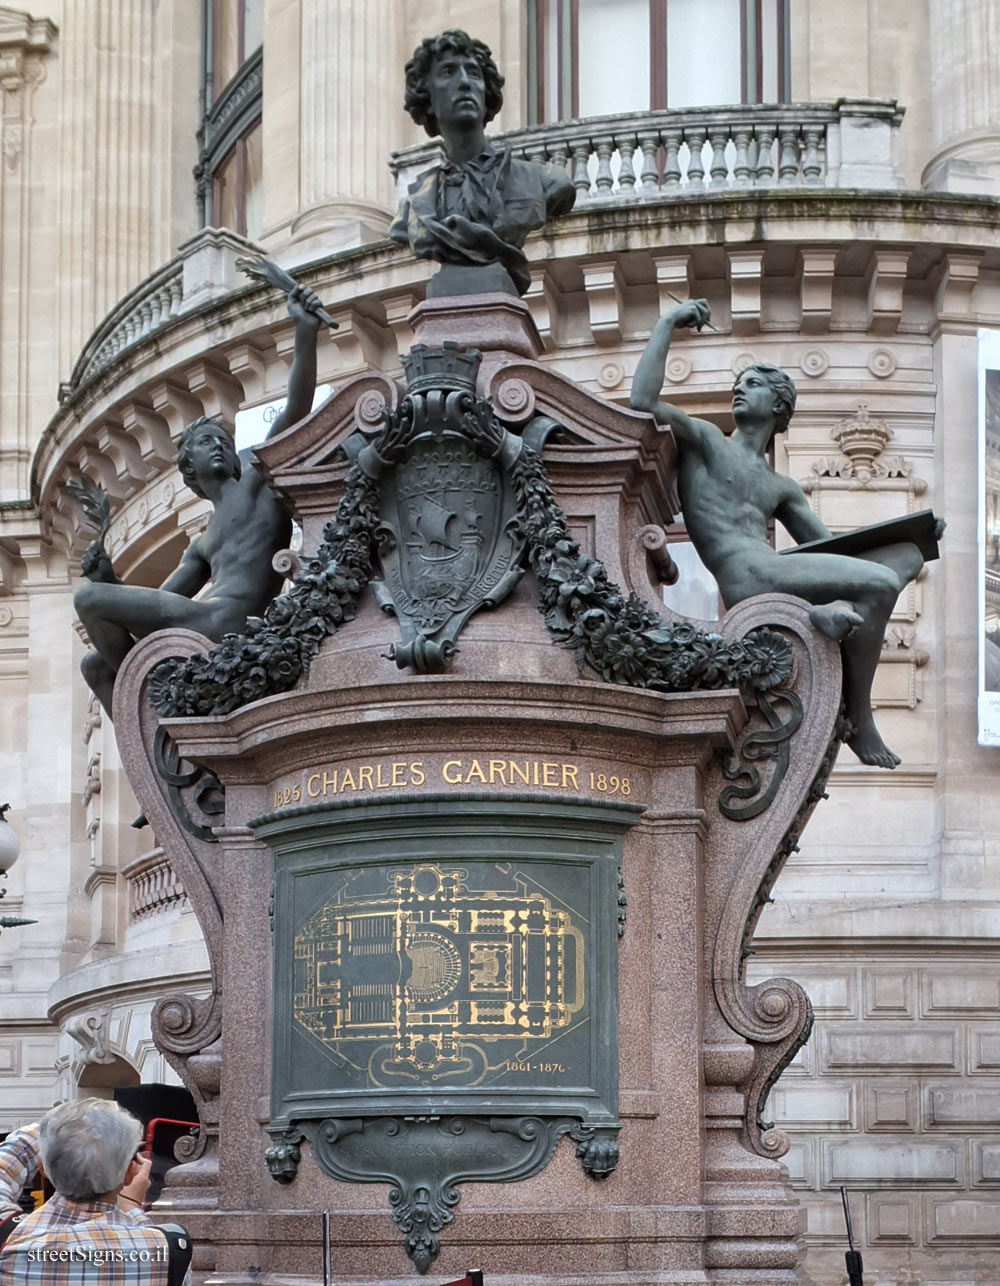 Paris - Monument to Charles Garnier in the opera building he designed